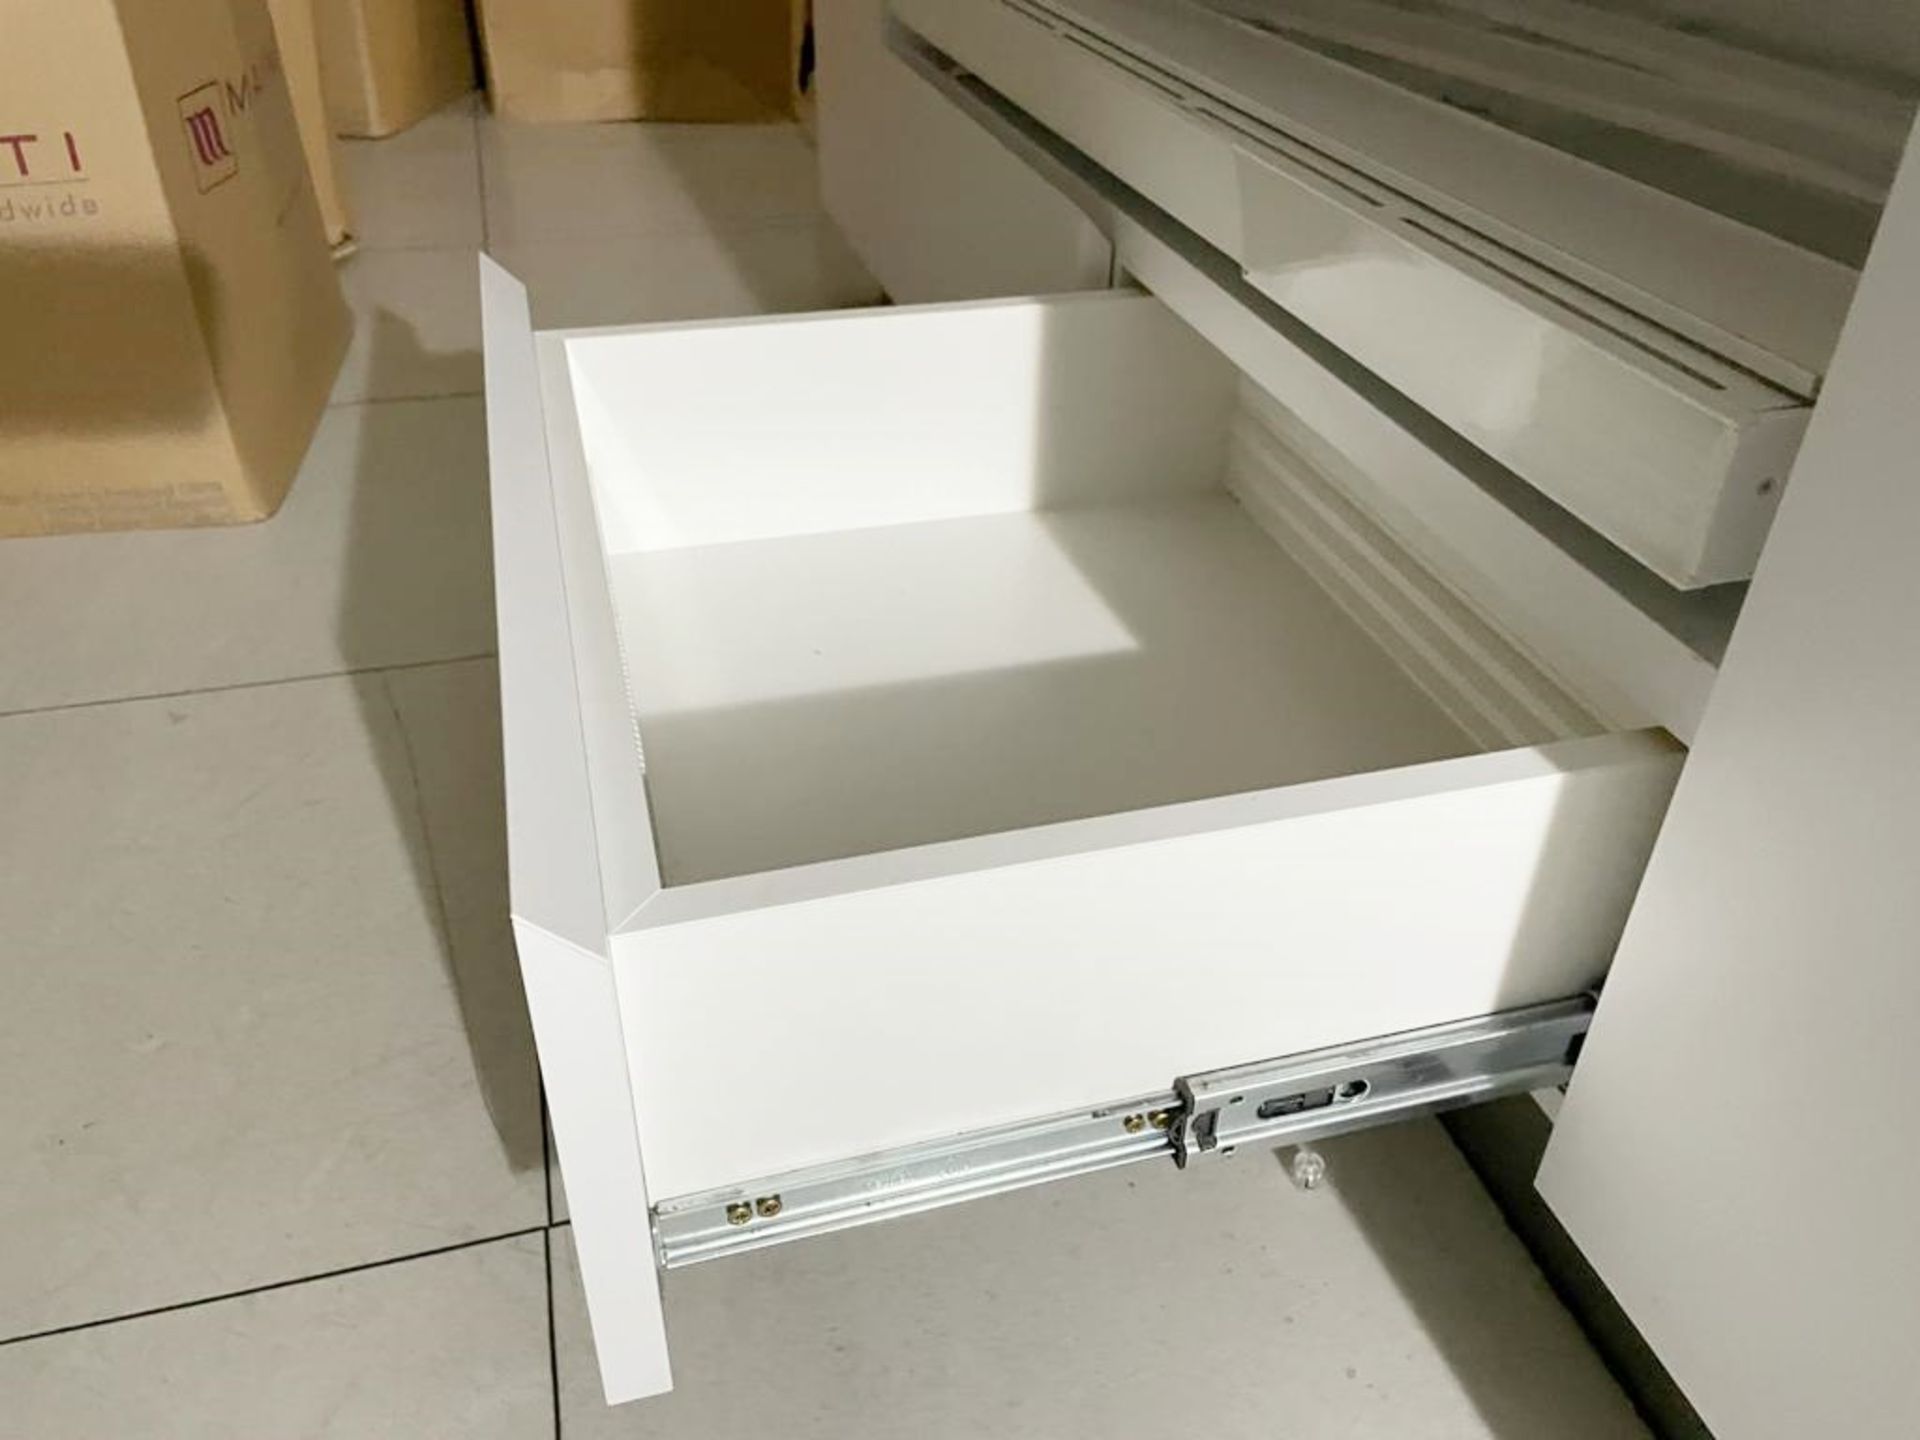 1 x Retail Four Sided Display Island With Shelves, Storage Drawers and Mirrored Panels - Size H150 x - Image 5 of 10